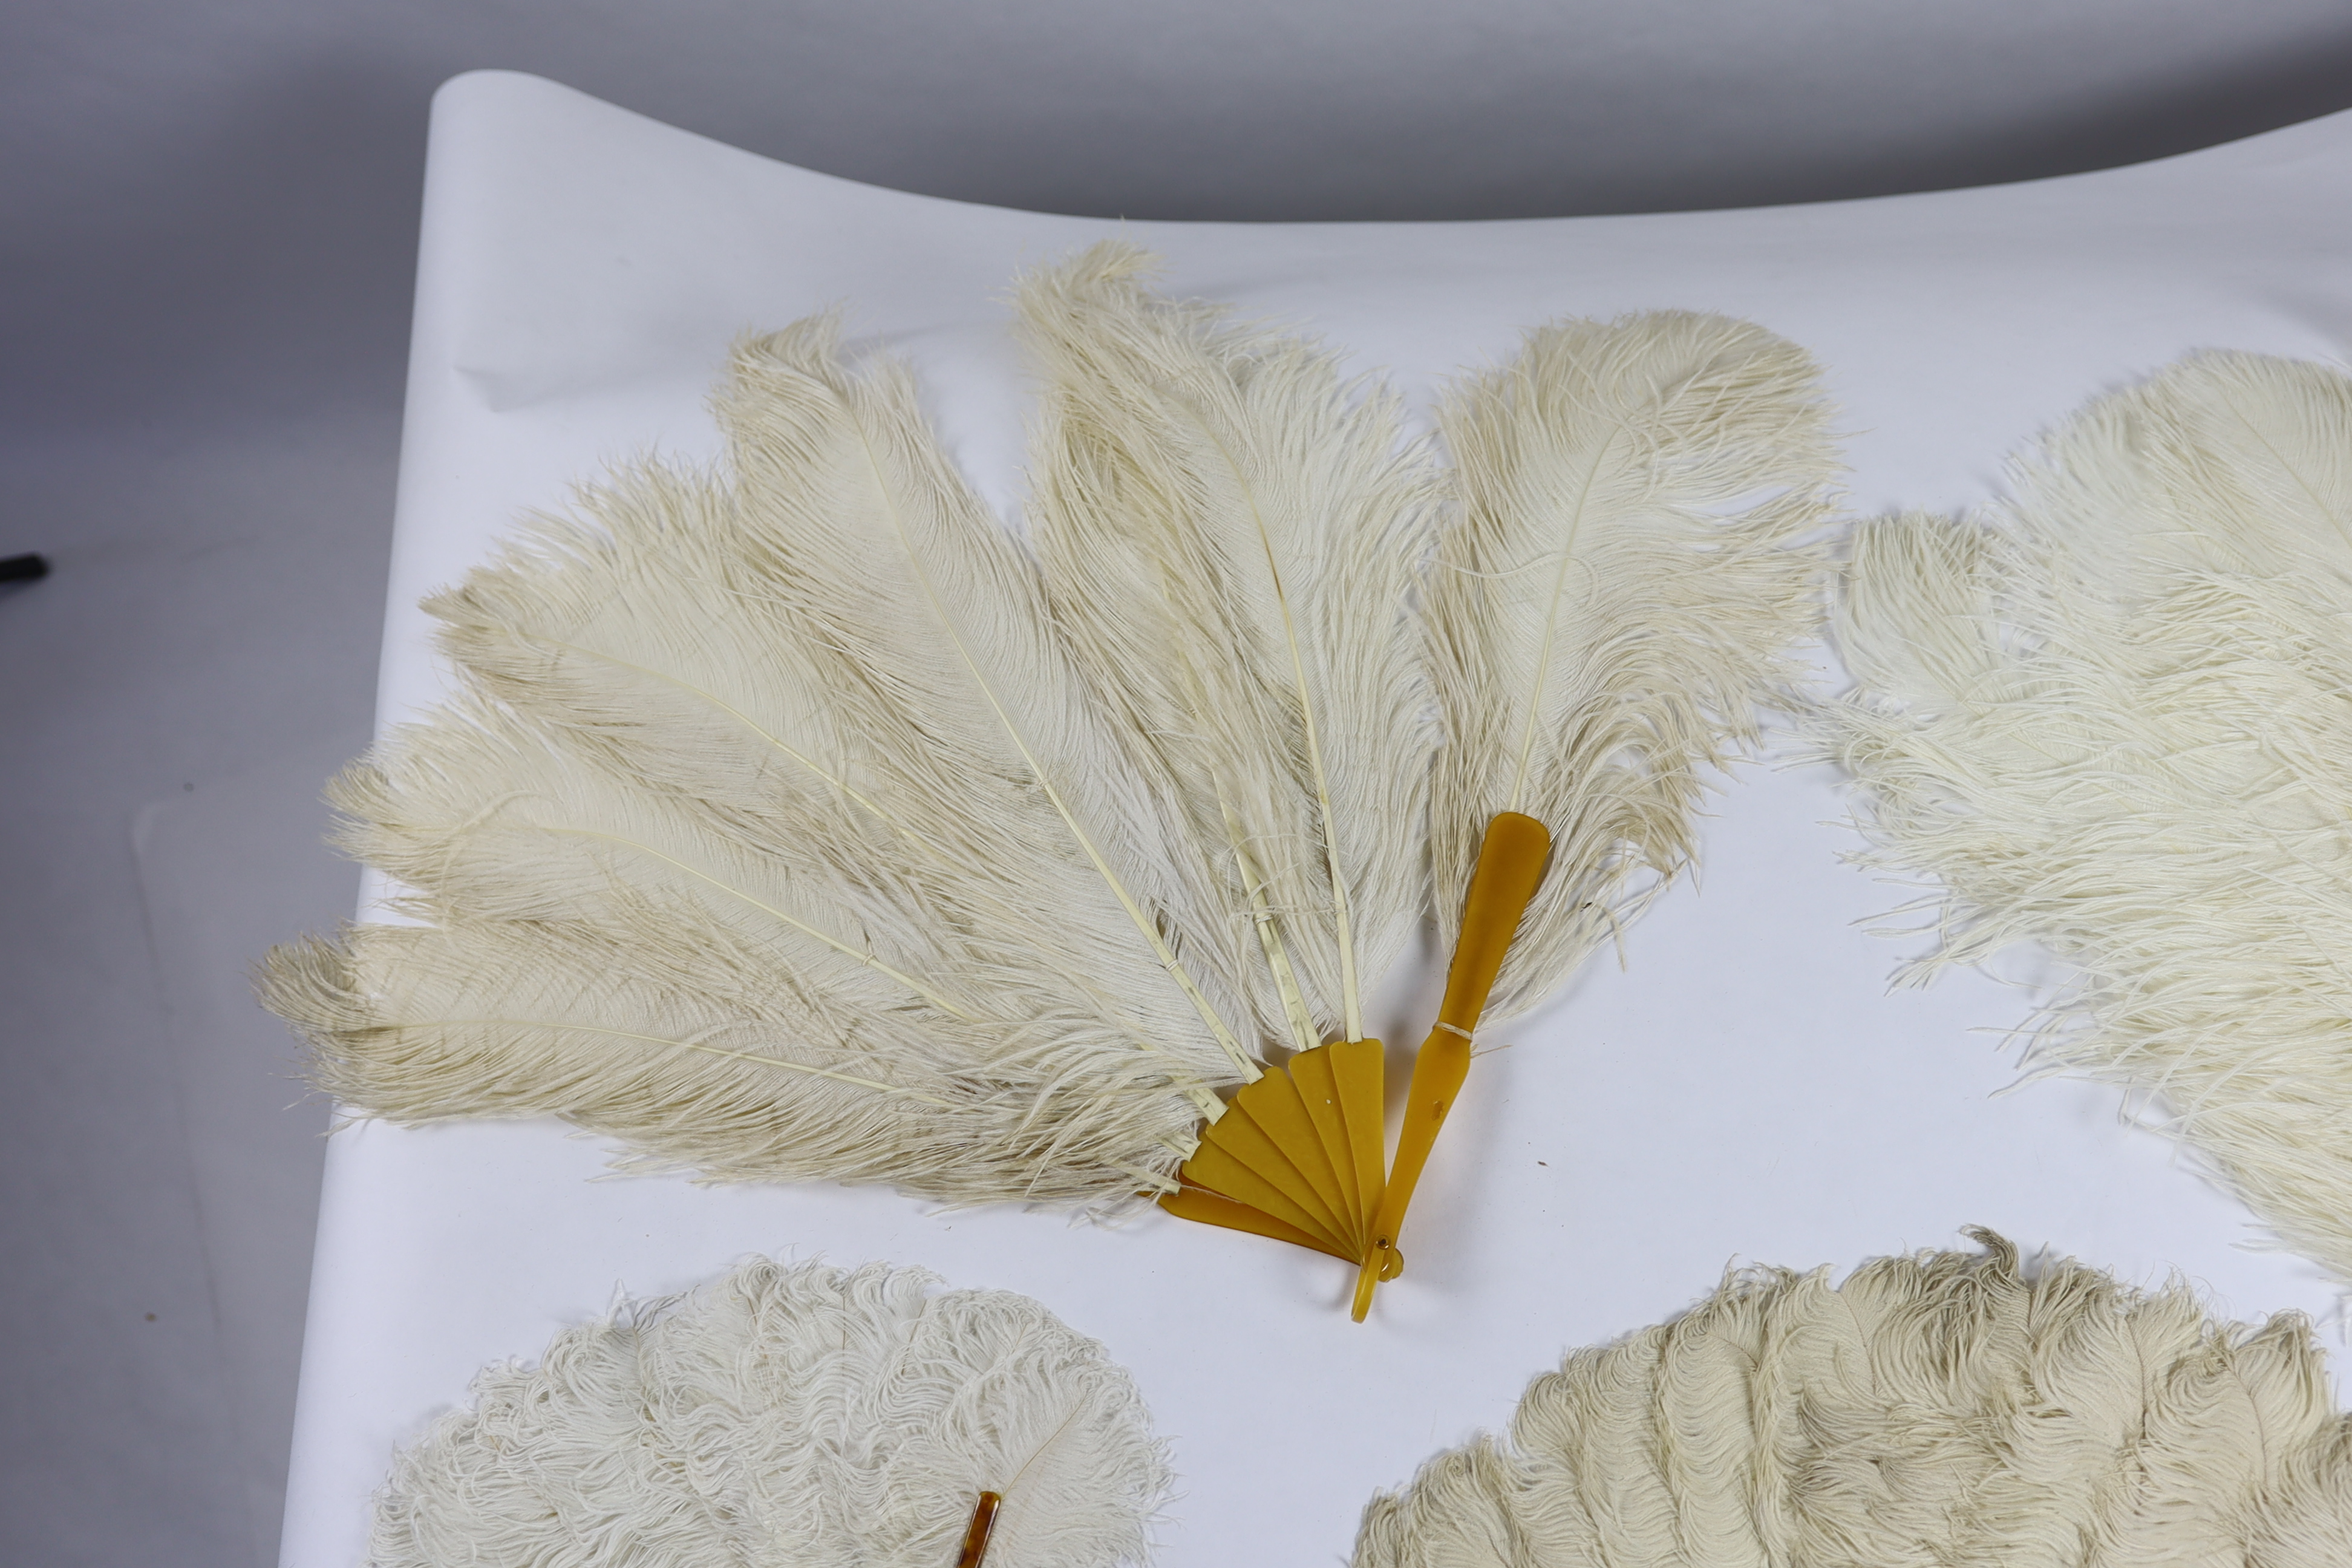 Two early 20th century Ostrich feather and mother of pearl fans, another similar fan with amber Bakelite handle and a small tortoiseshell and feather fan (4)